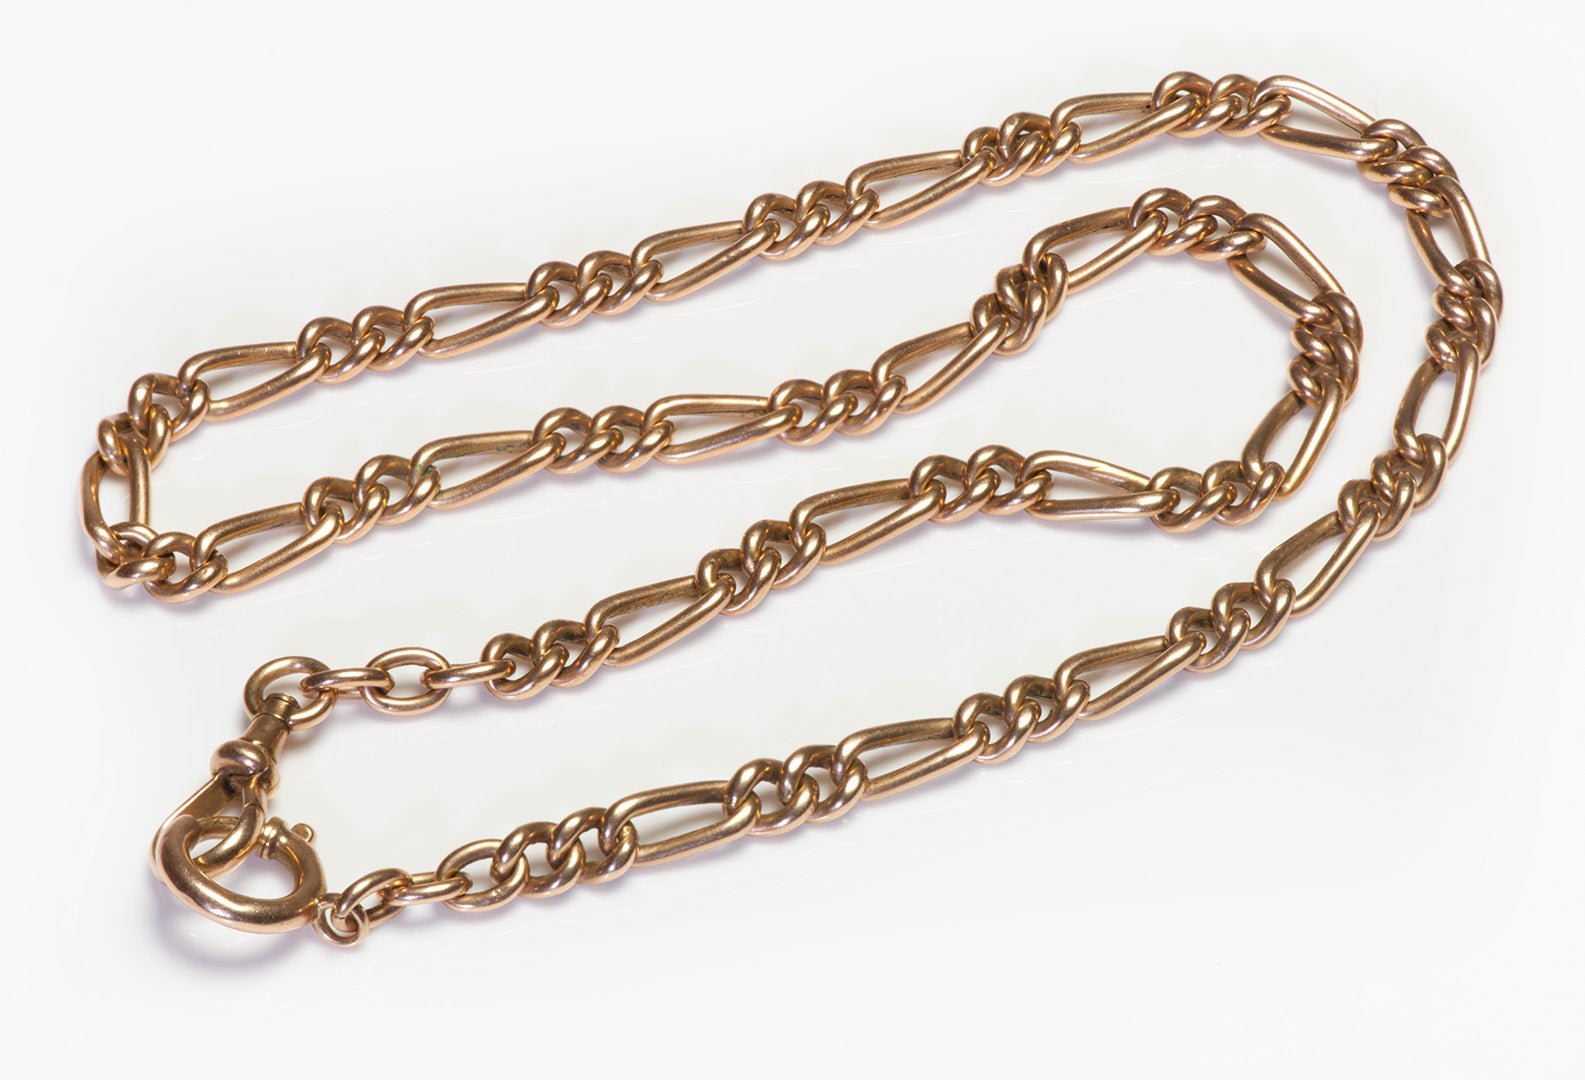 Antique Yellow Gold Link Watch Chain